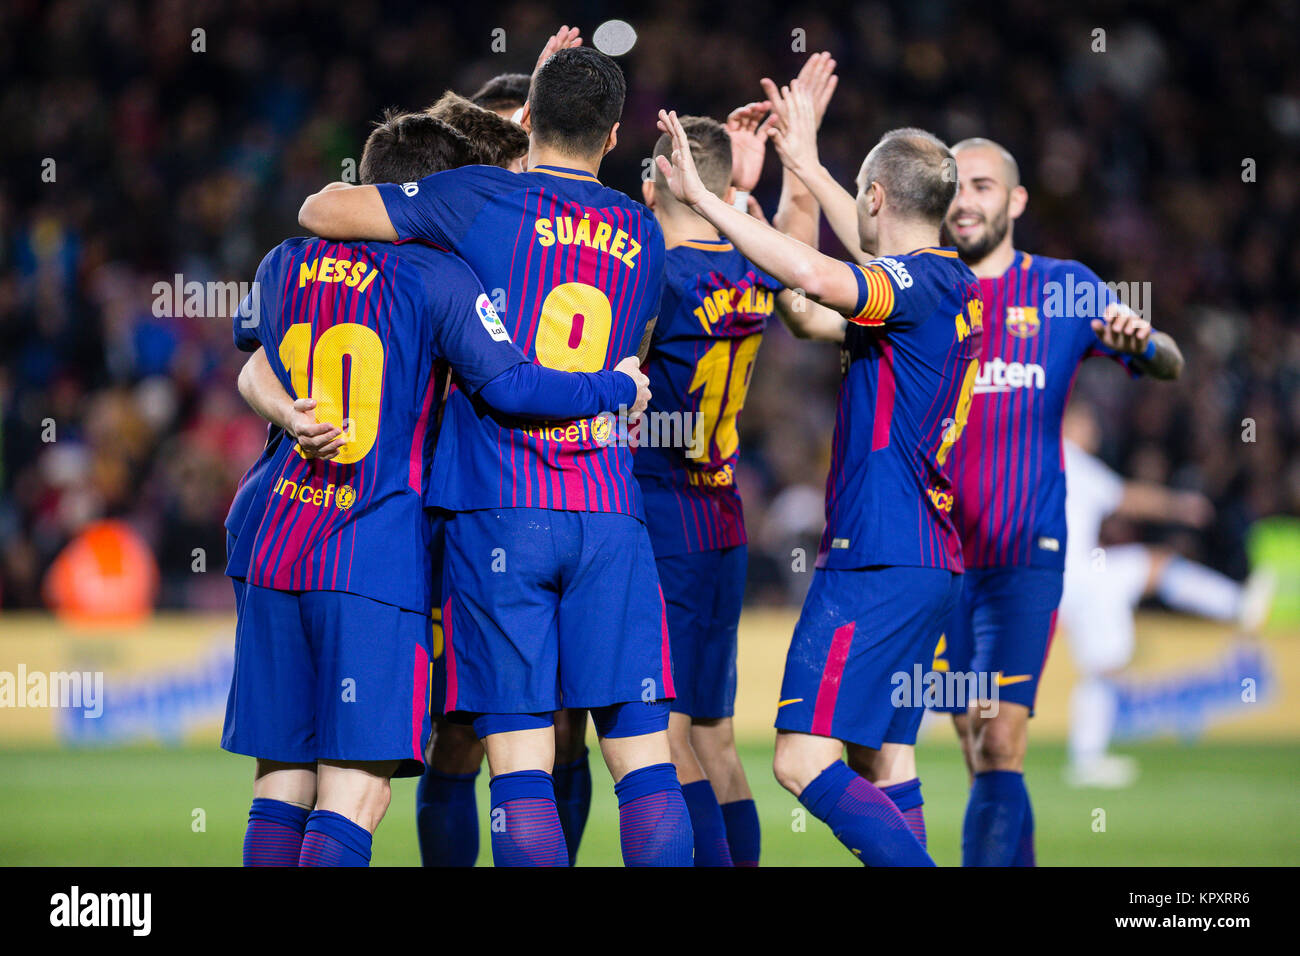 Barcelona, Spain. 17th Dec, 2017. SPAIN - 17th of December: Barcelona forward Luis Suarez (9) with his teammates of FC Barcelona celebrates after scoring the goal during the match between FC Barcelona against Deportivo Coruna, for the round 16 of the Liga Santander, played at Camp Nou Stadium on 17th December 2017 in Barcelona, Spain. (Credit: GTO/Urbanandsport/Gtres Online) Credit: Gtres Información más Comuniación on line, S.L./Alamy Live News Stock Photo